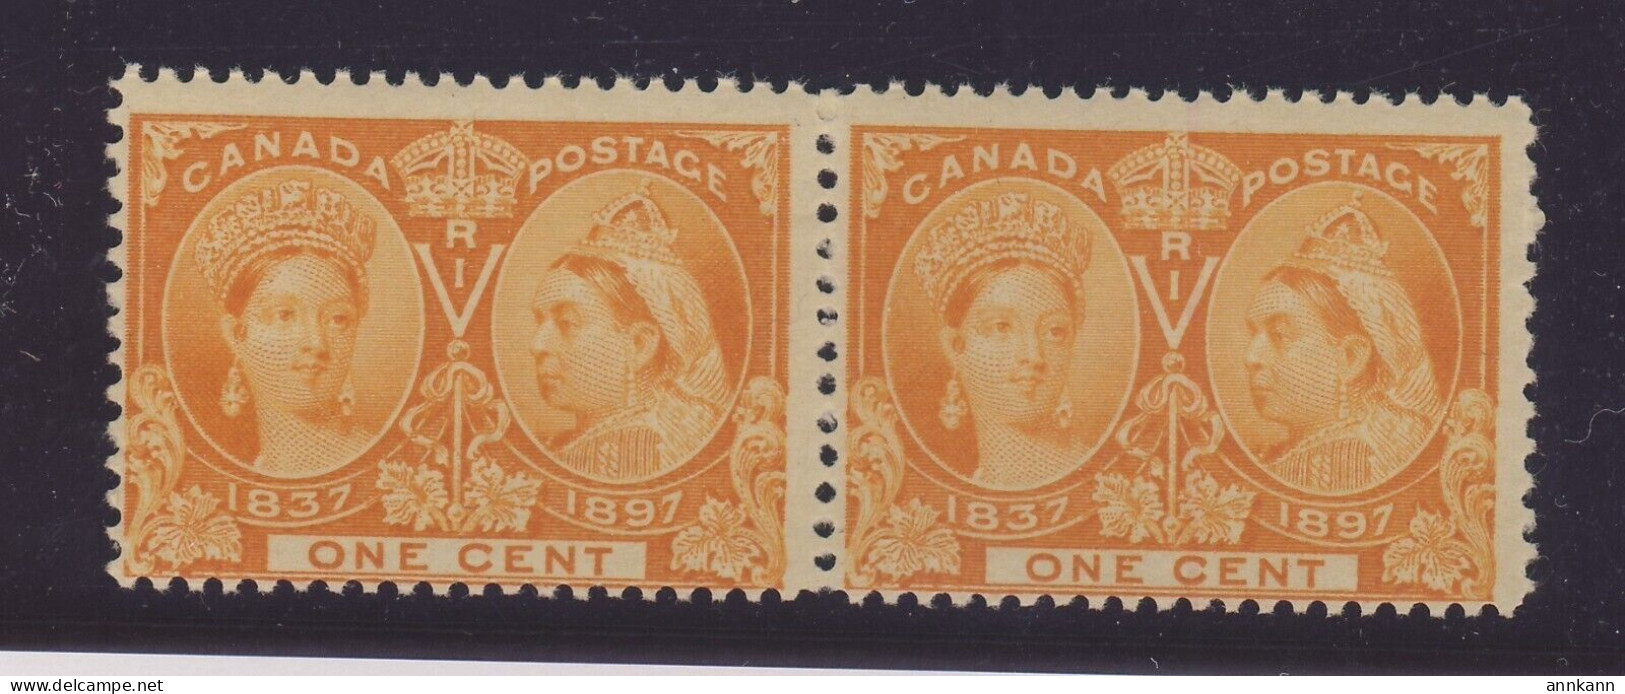 2x Canada Victoria Jubilee M Stamps: Pair #51-1c MNH Fine Guide Value = $40.00 - Unused Stamps